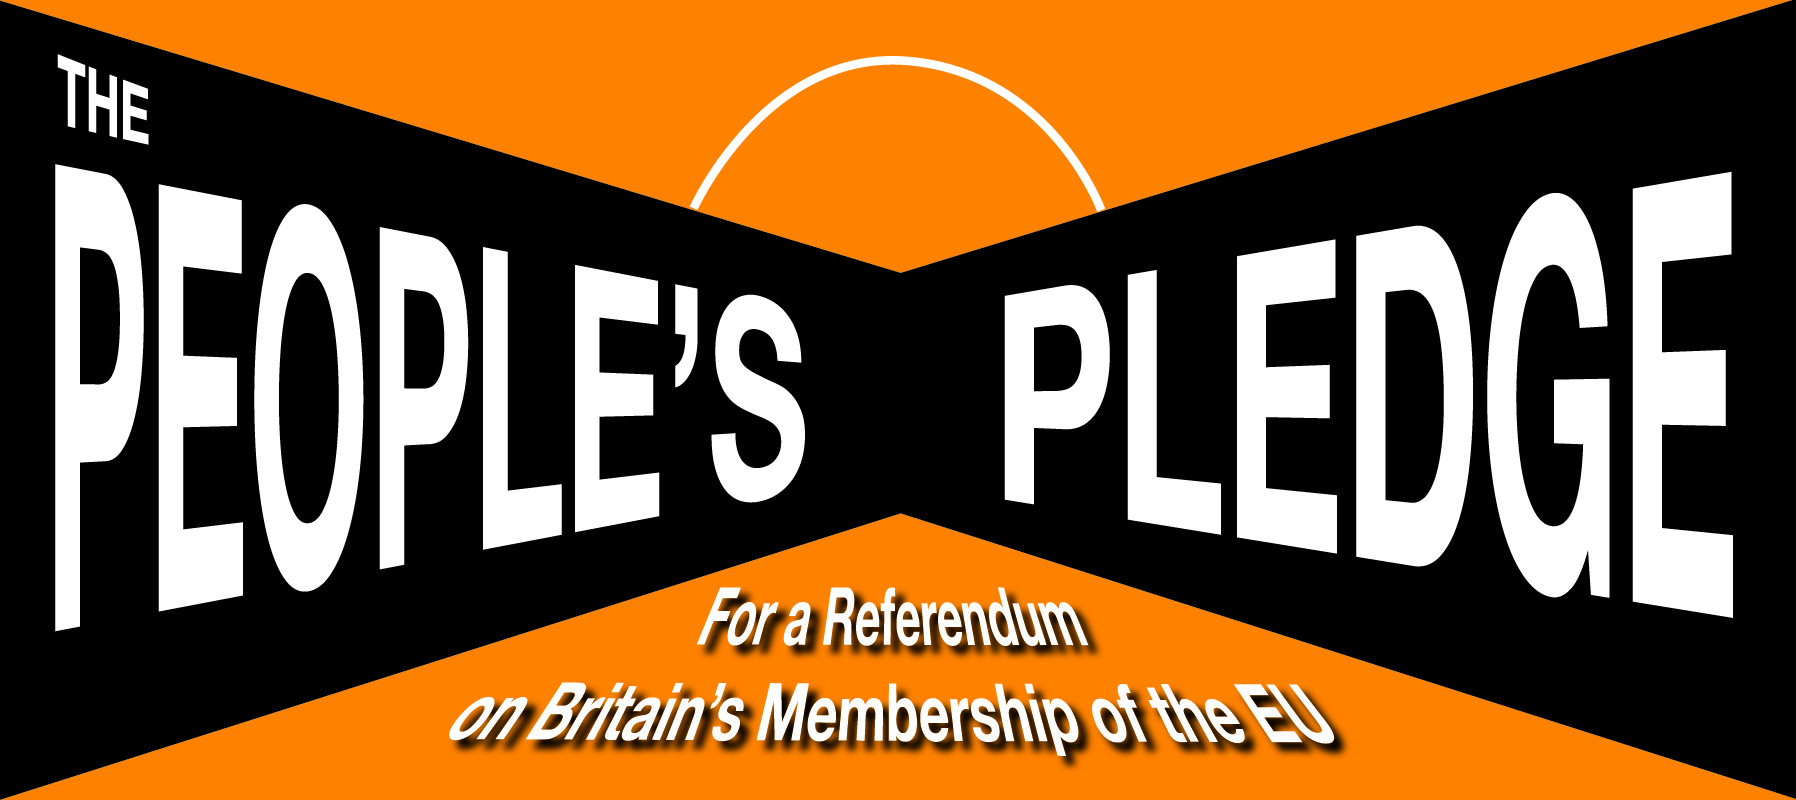 People's Pledge for a referendum